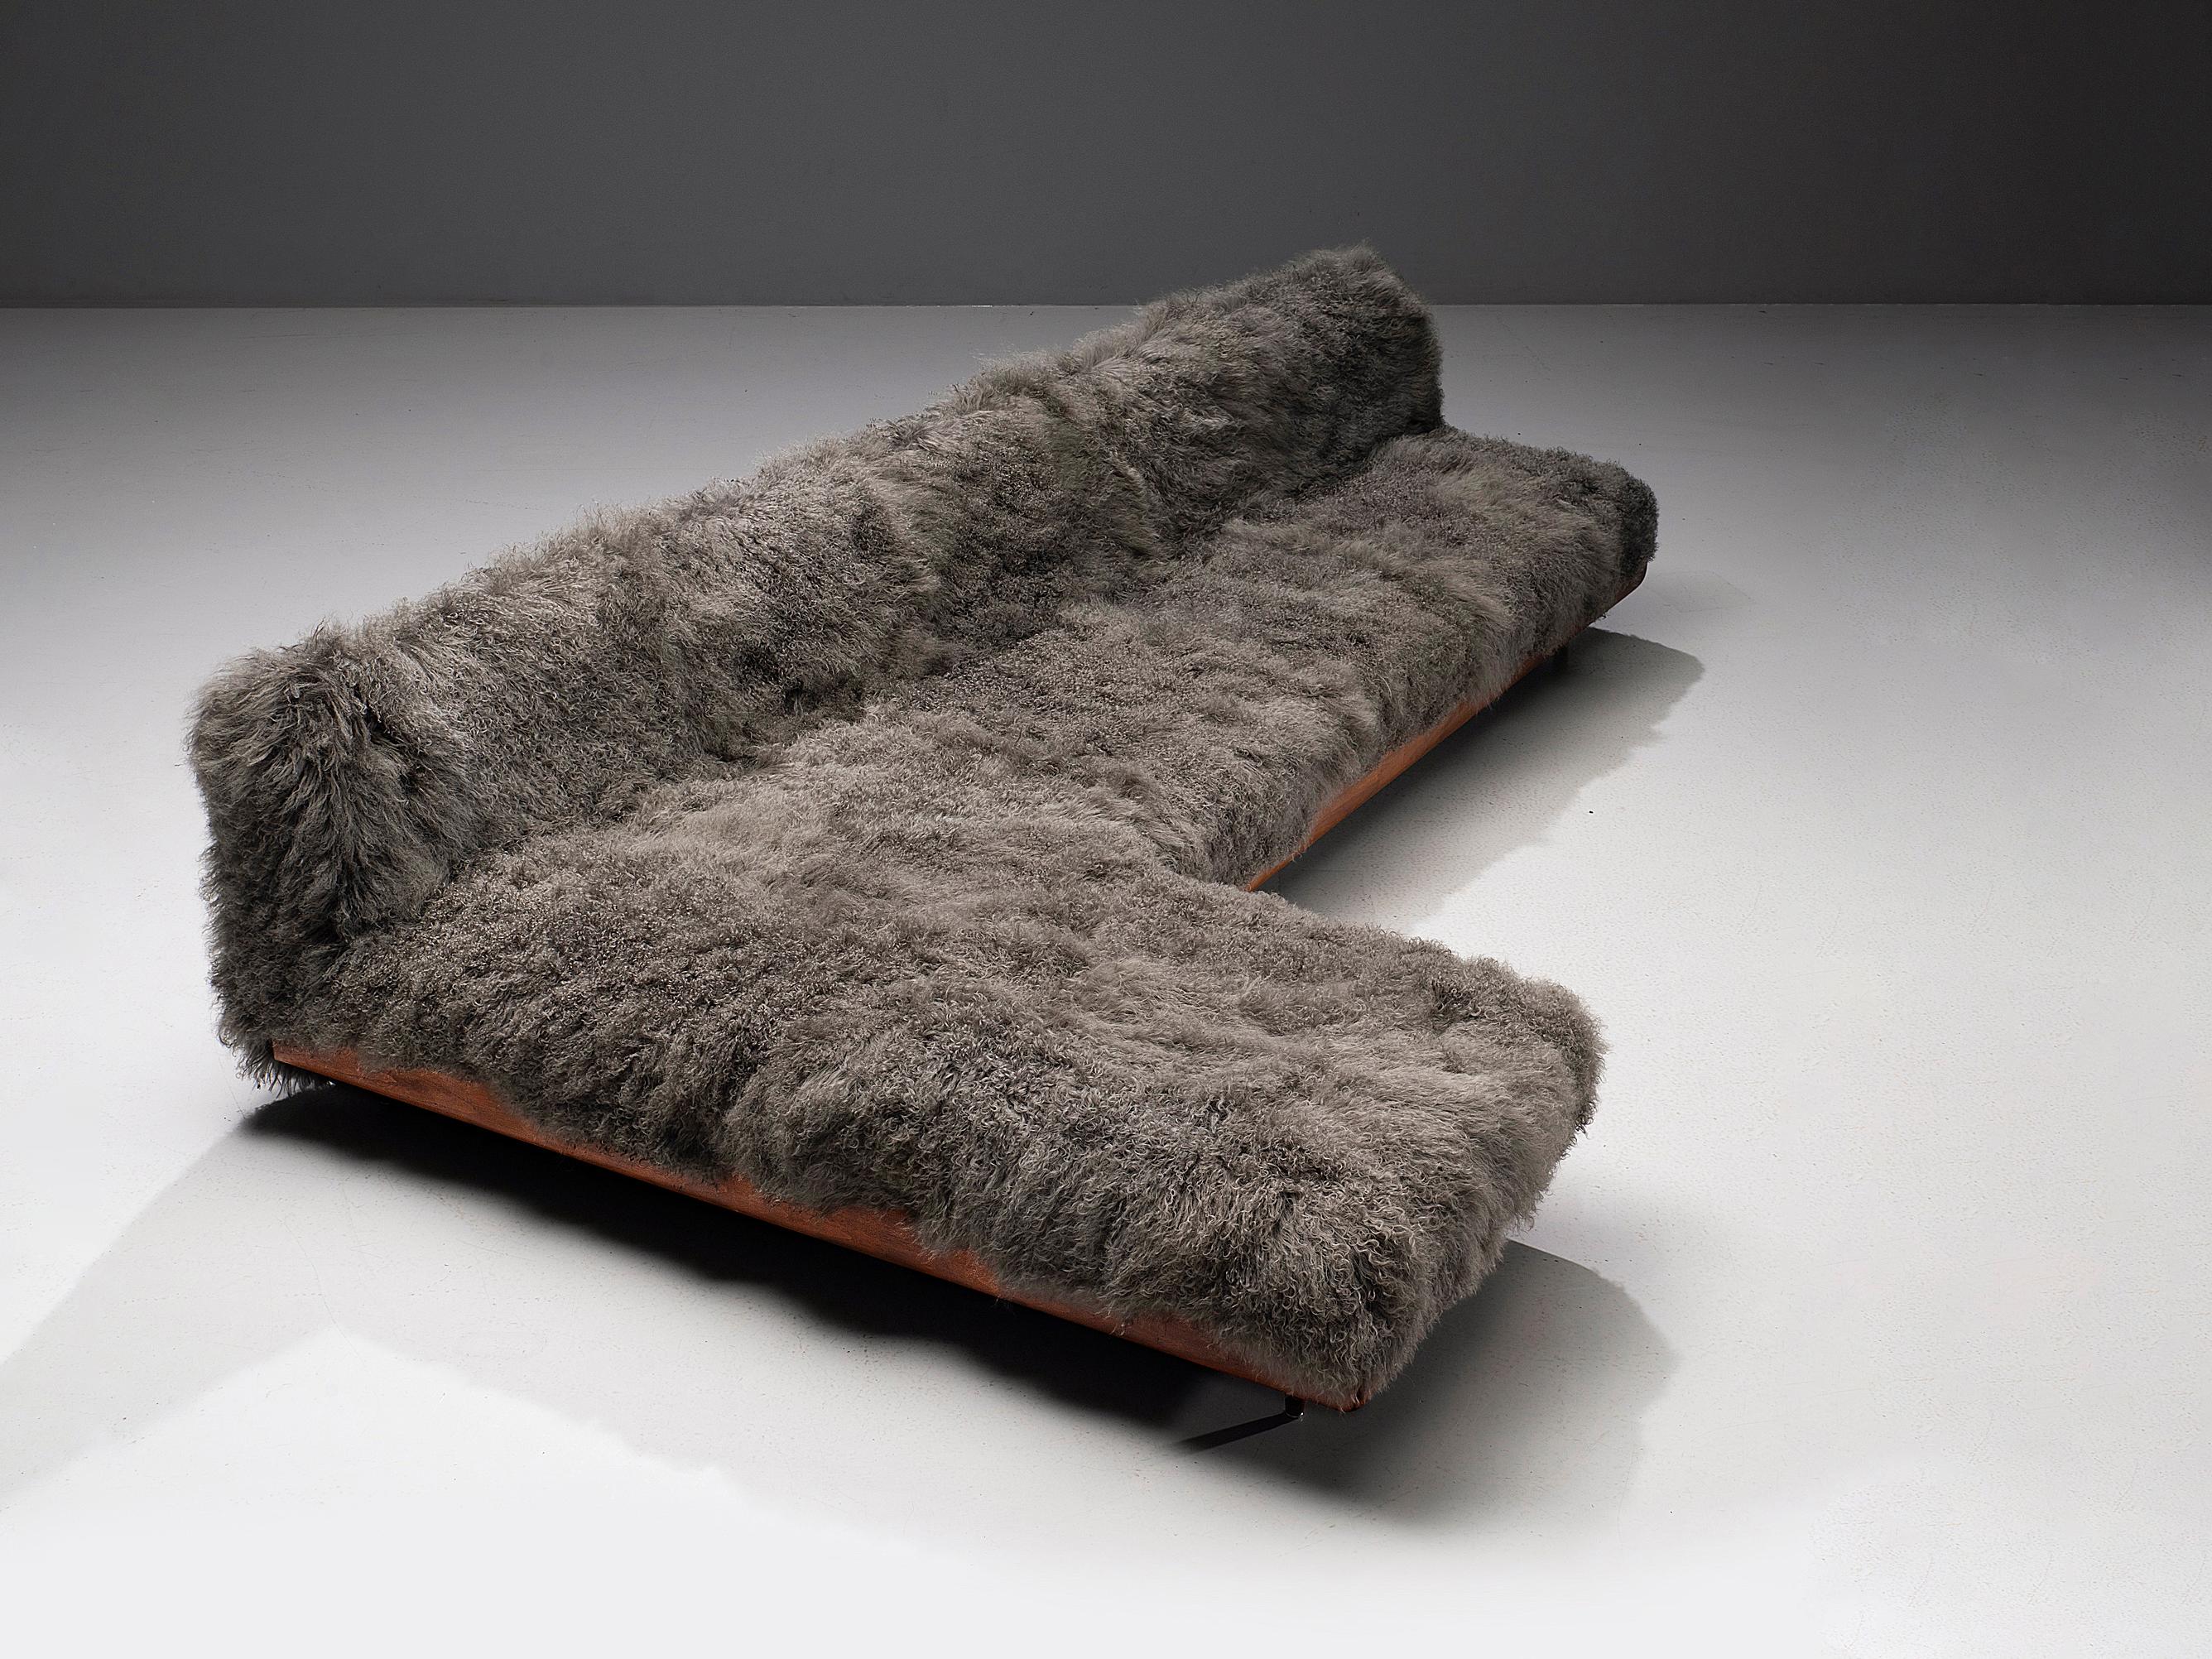 Adrian Pearsall for Craft Associates, 'Boomerang' sofa, model '1600-S', Tibetan wool, walnut, United States, 1960s

This boomerang sofa has a unique shape based on angular lines, creating a monumental and inviting look. The right-facing sofa is a